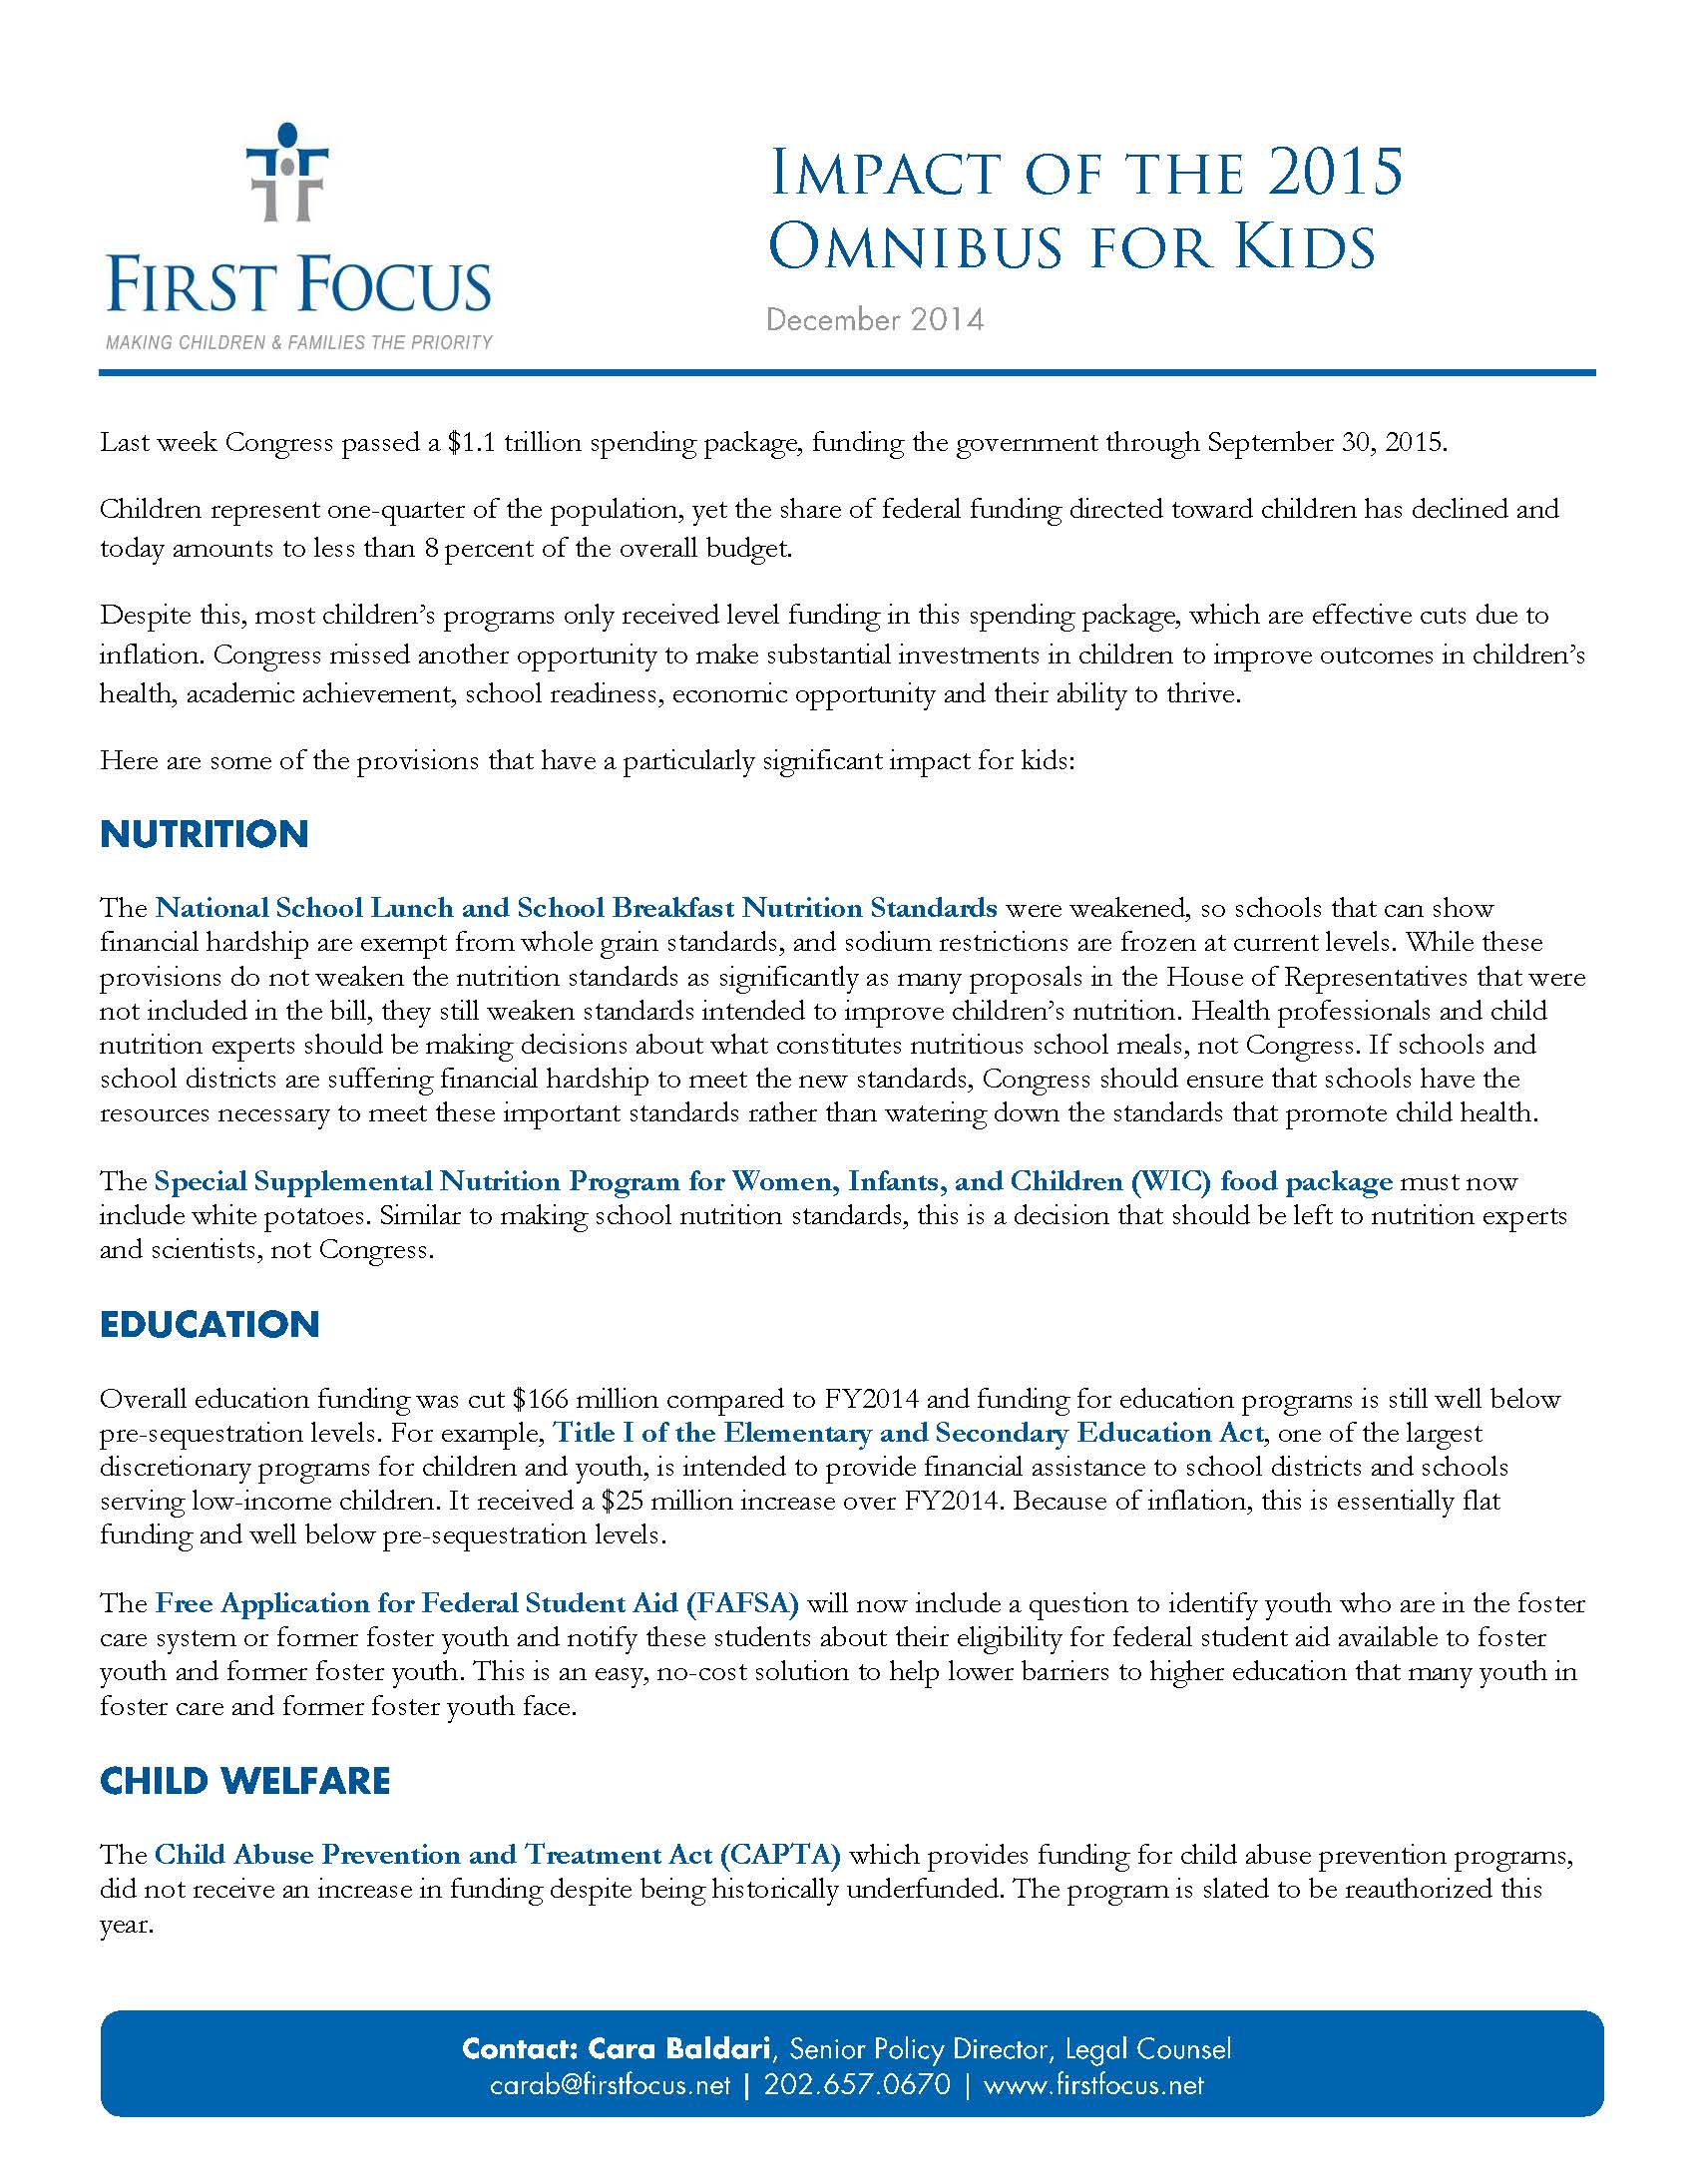 Impact of the 2015 Omnibus for Kids_Page_1